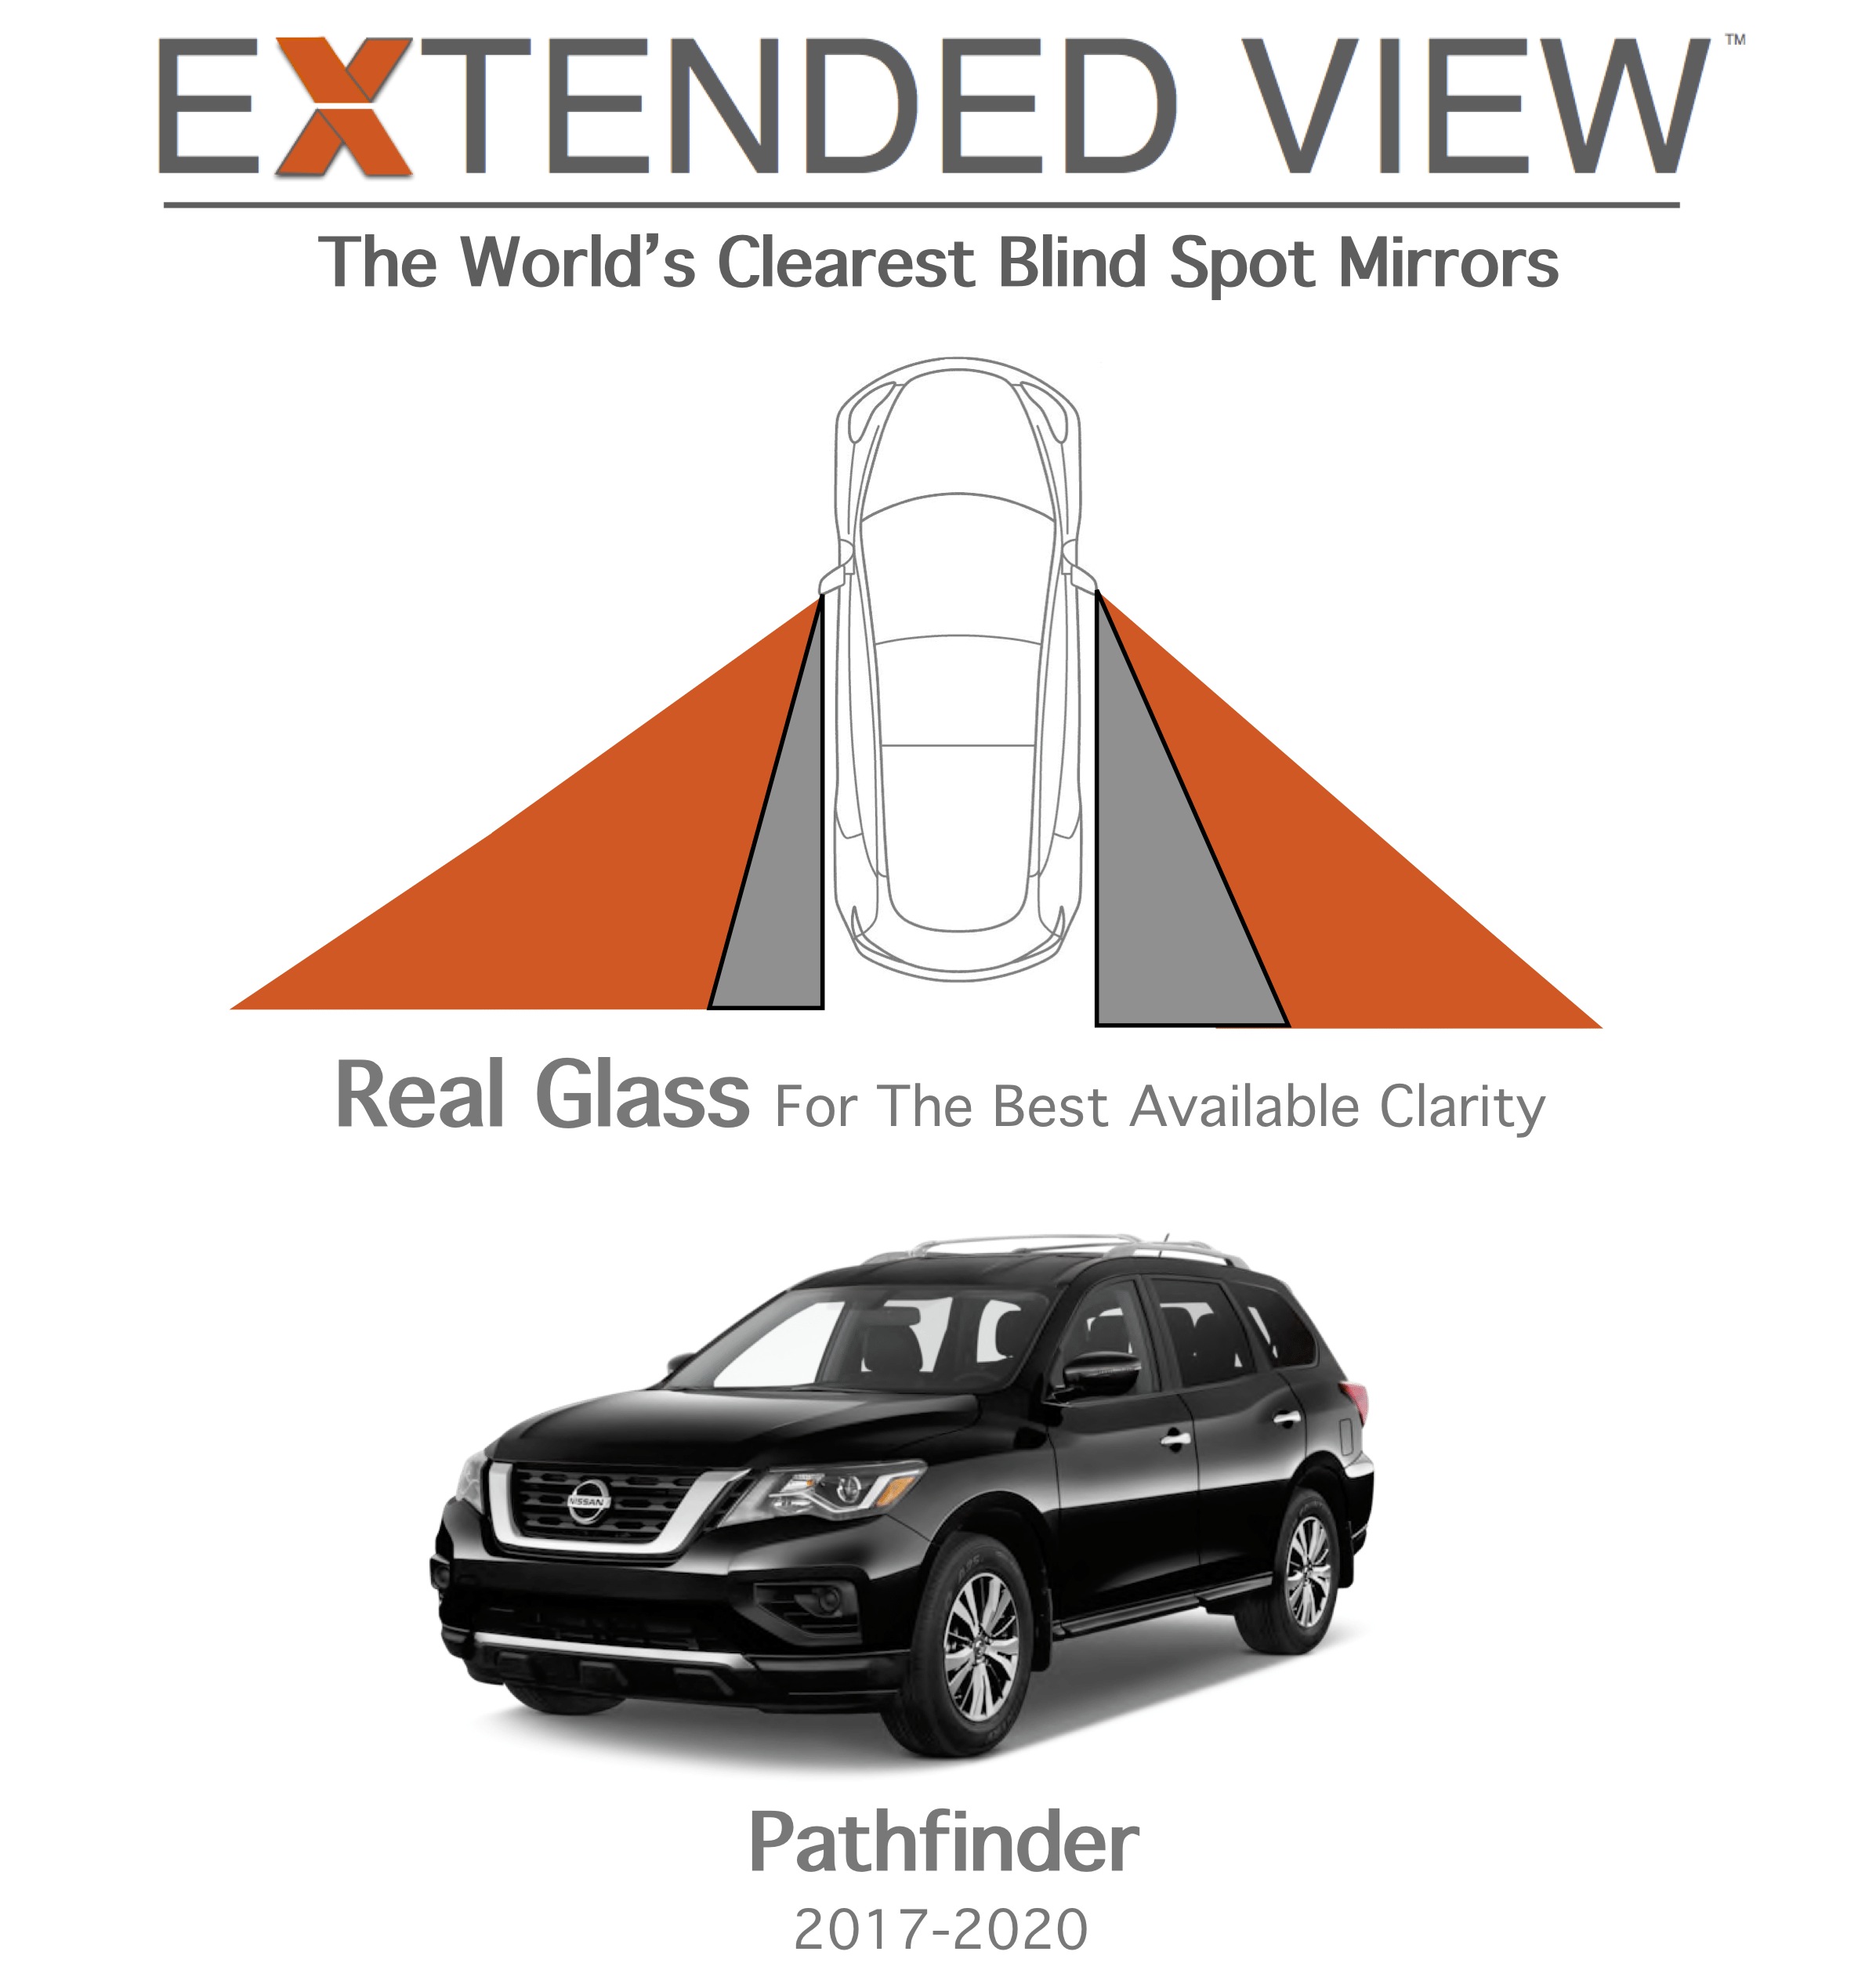 Nissan Pathfinder Blind Spot Mirrors | Extended View™